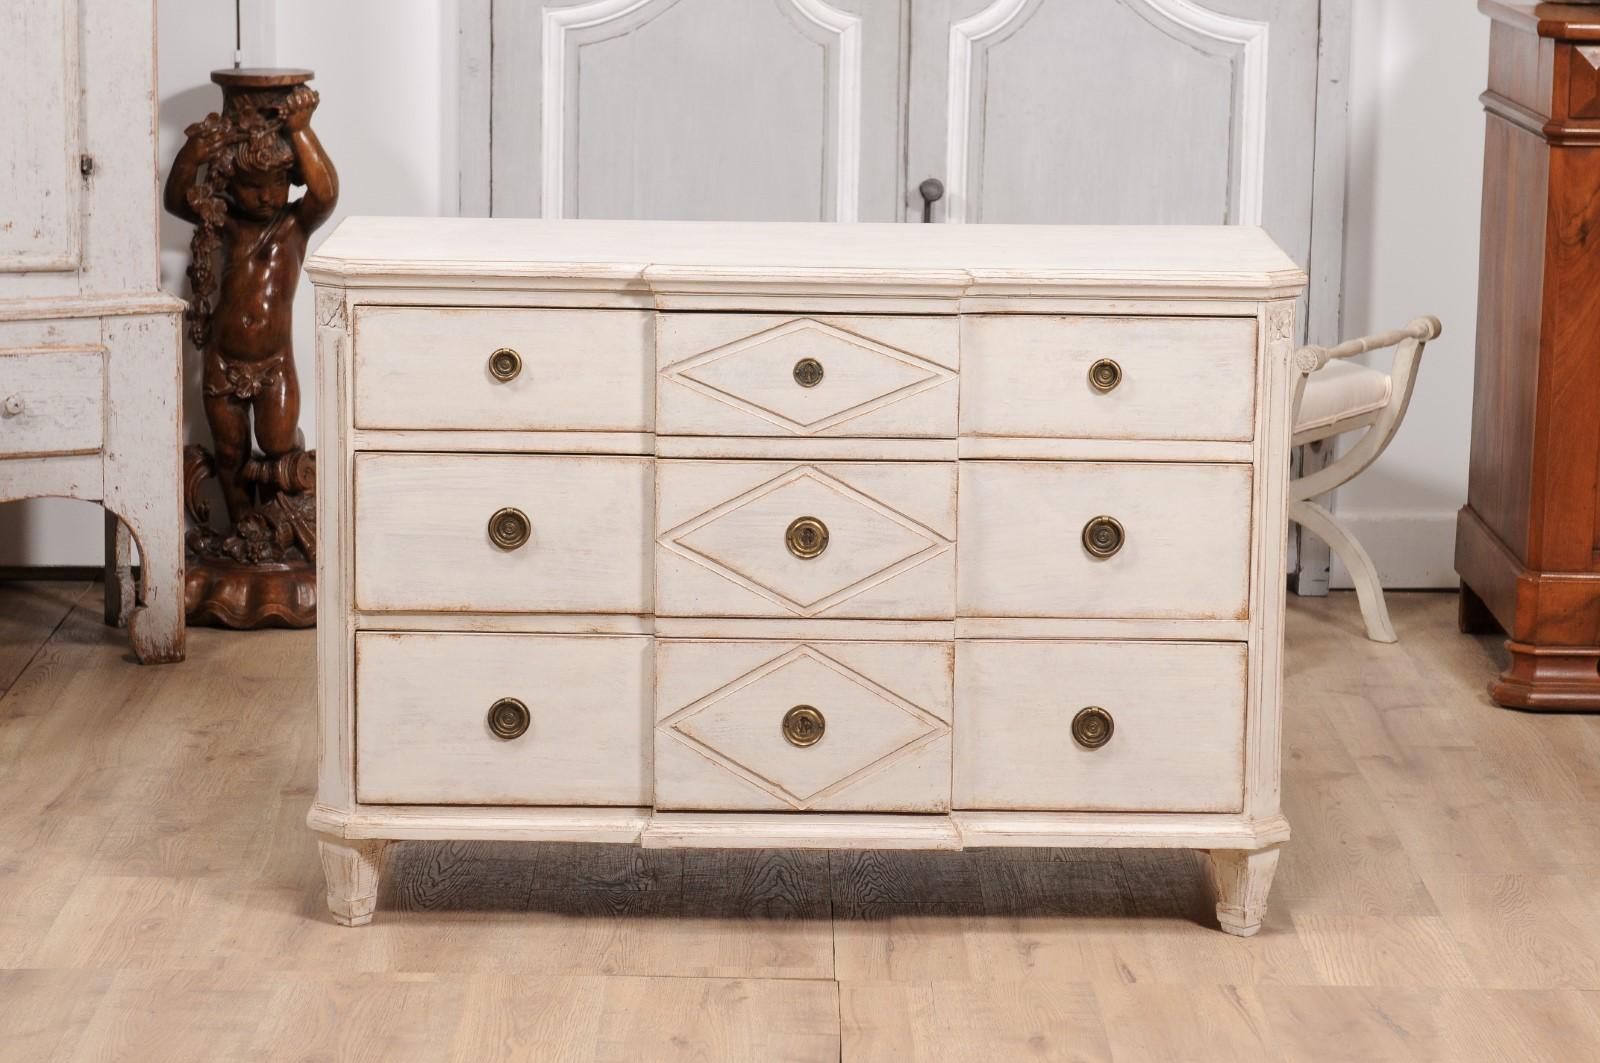 Swedish 1850s Creamy Gray Painted Chest From Dalarna with Carved Diamond Motifs For Sale 8